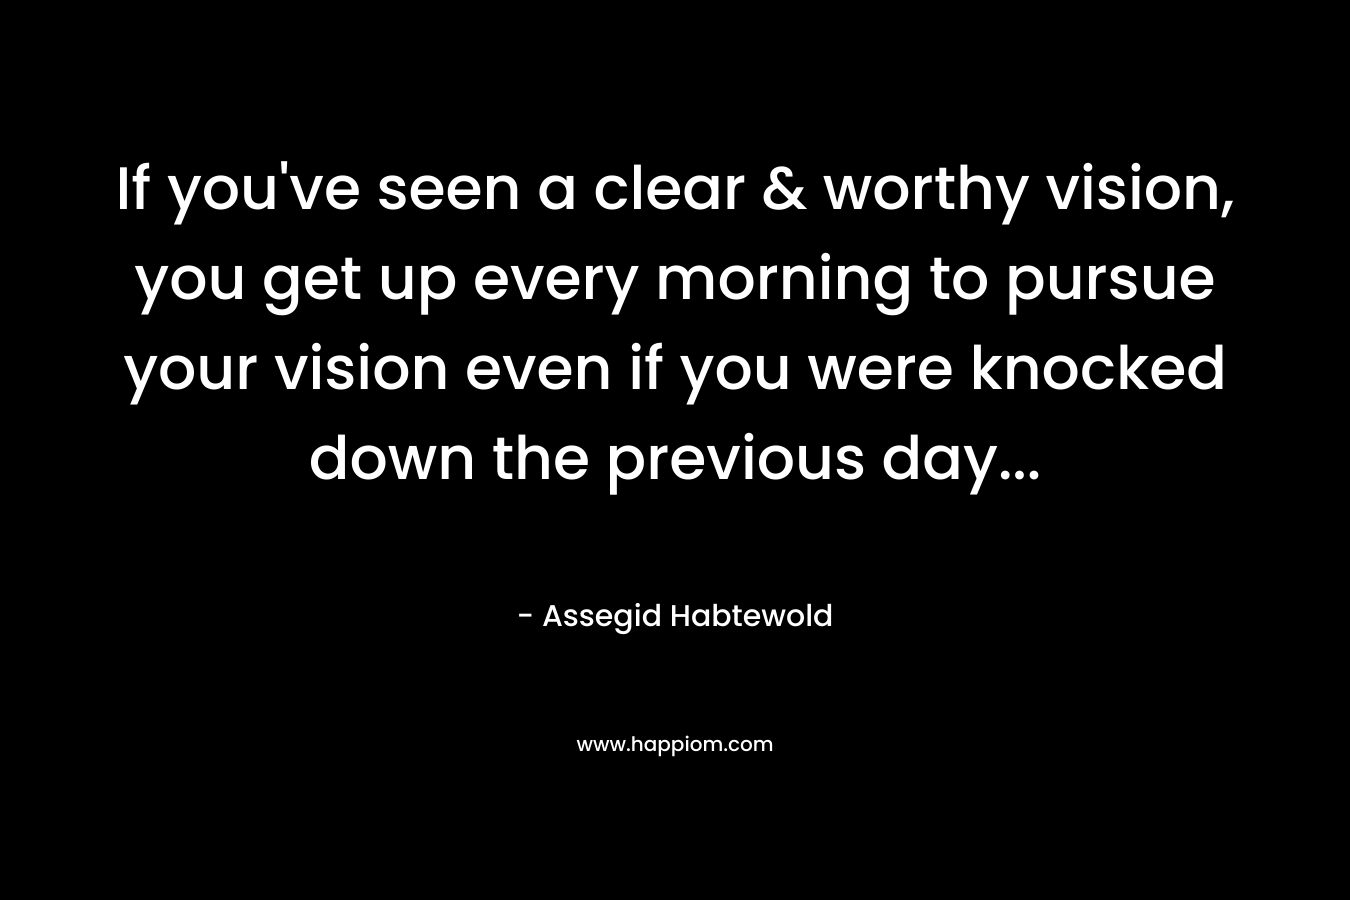 If you've seen a clear & worthy vision, you get up every morning to pursue your vision even if you were knocked down the previous day...